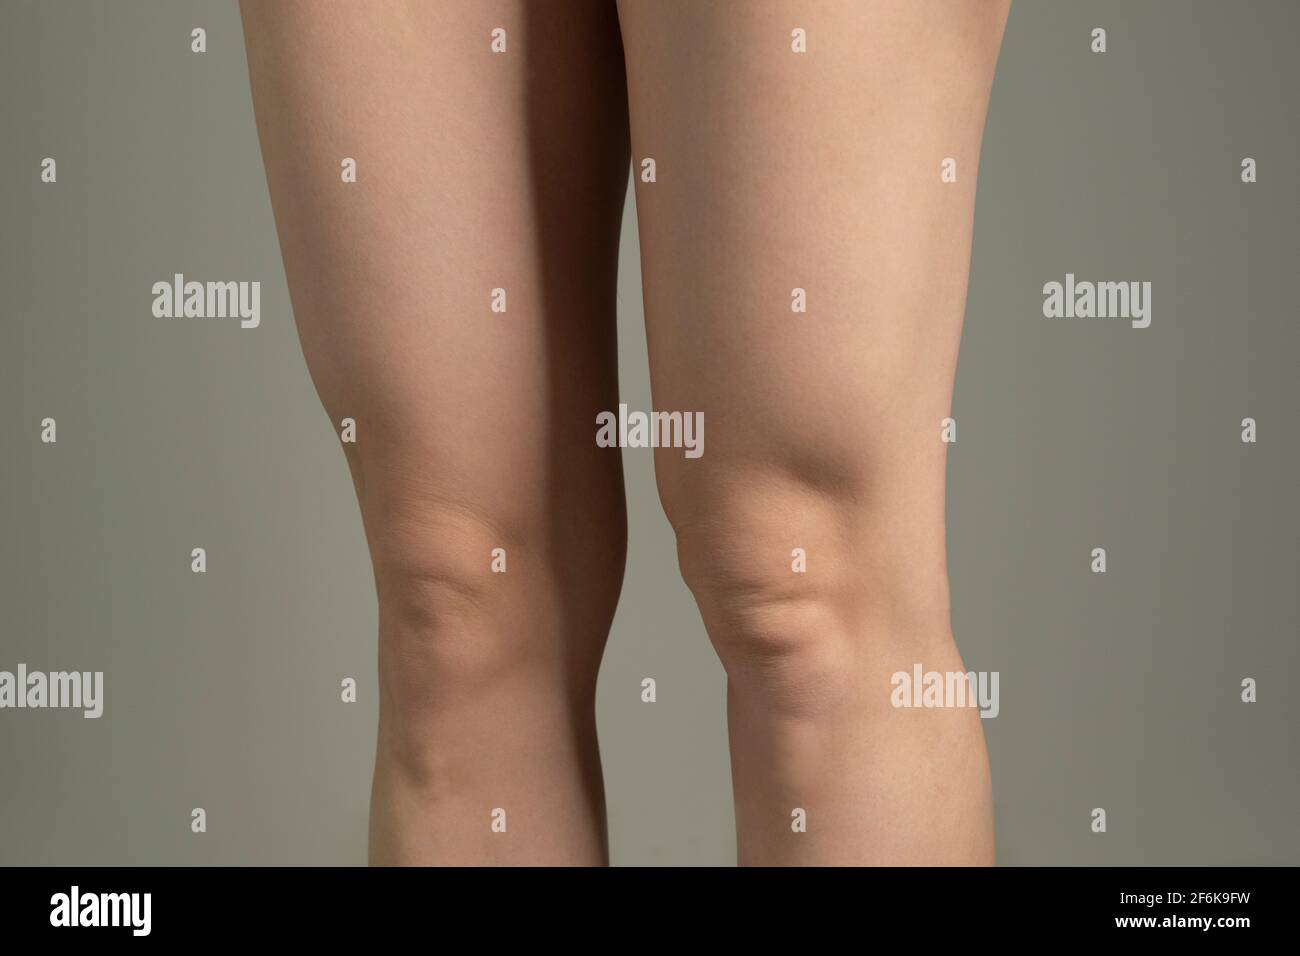 Fat folds above knees. Woman`s hips closeup raw studio shot in grey background. Dieting and fat loss concept. Stock Photo